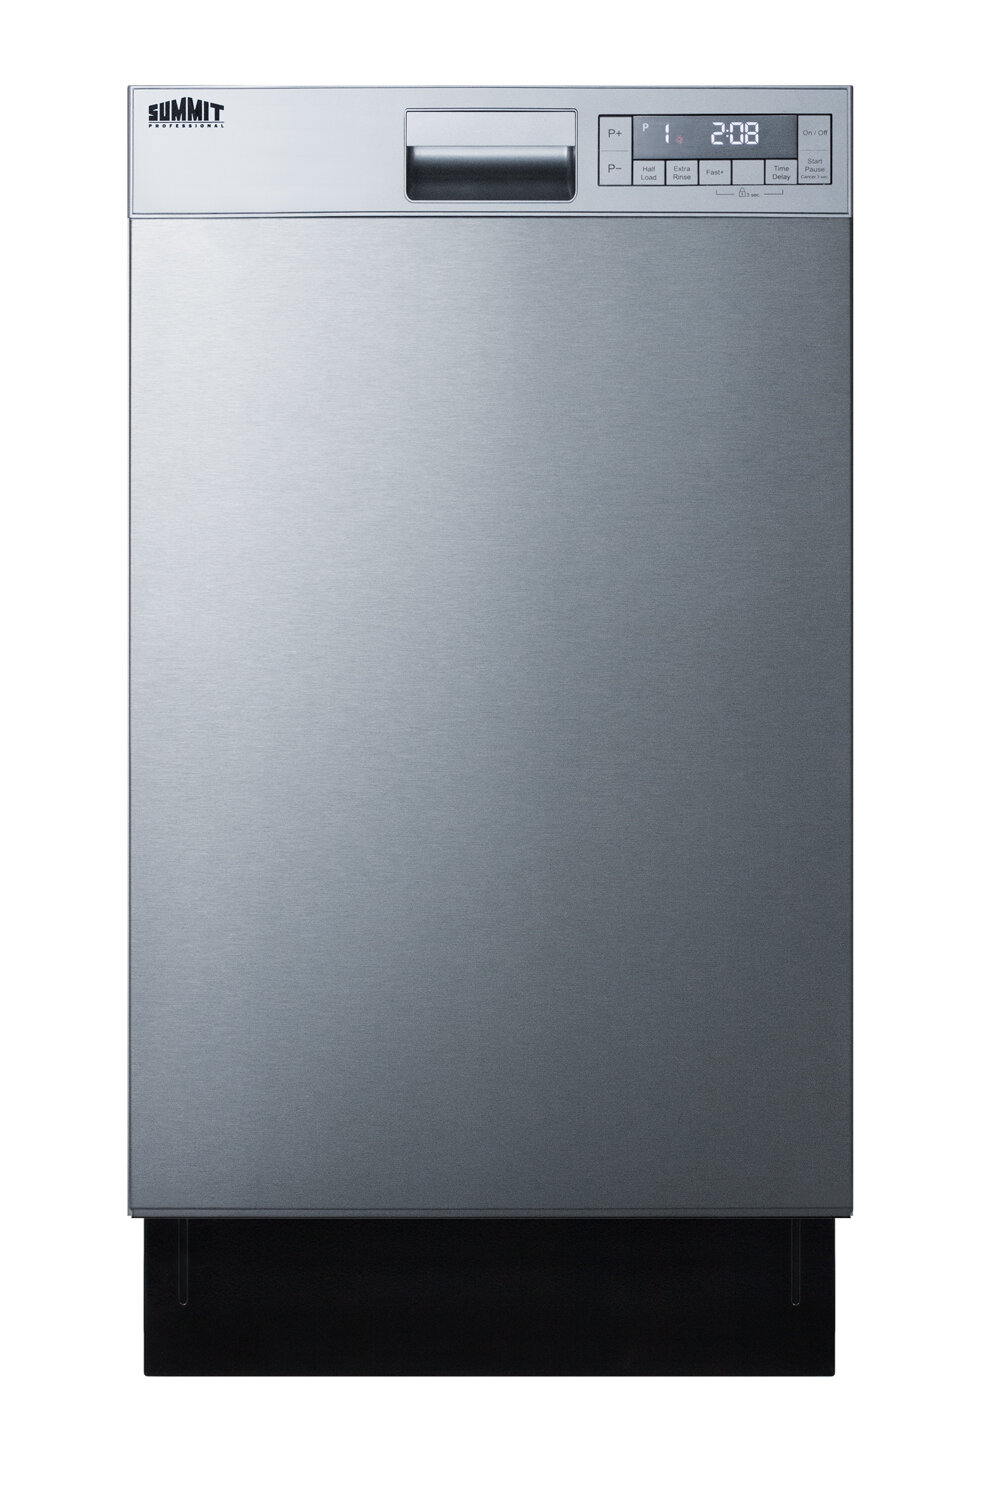 Black And Decker BCD6W Dishwasher Review